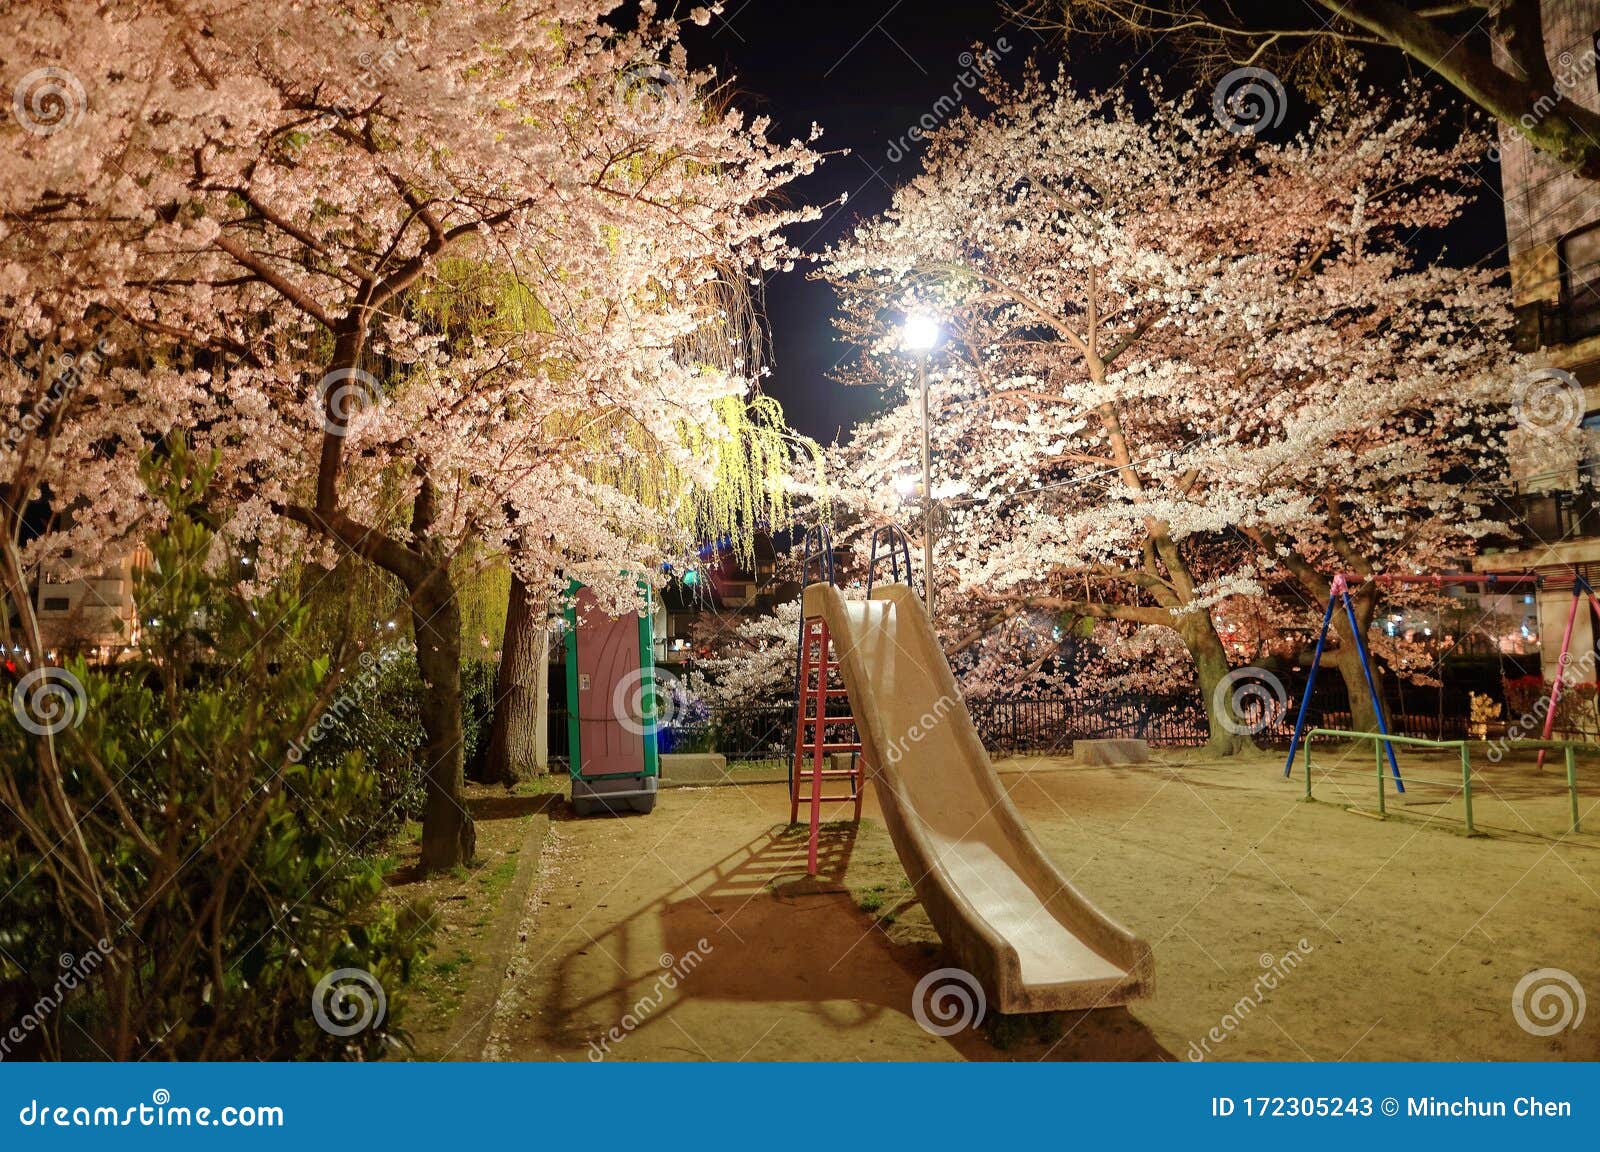 Night Scenery of a Lovely Corner in an Urban Park, with a ...